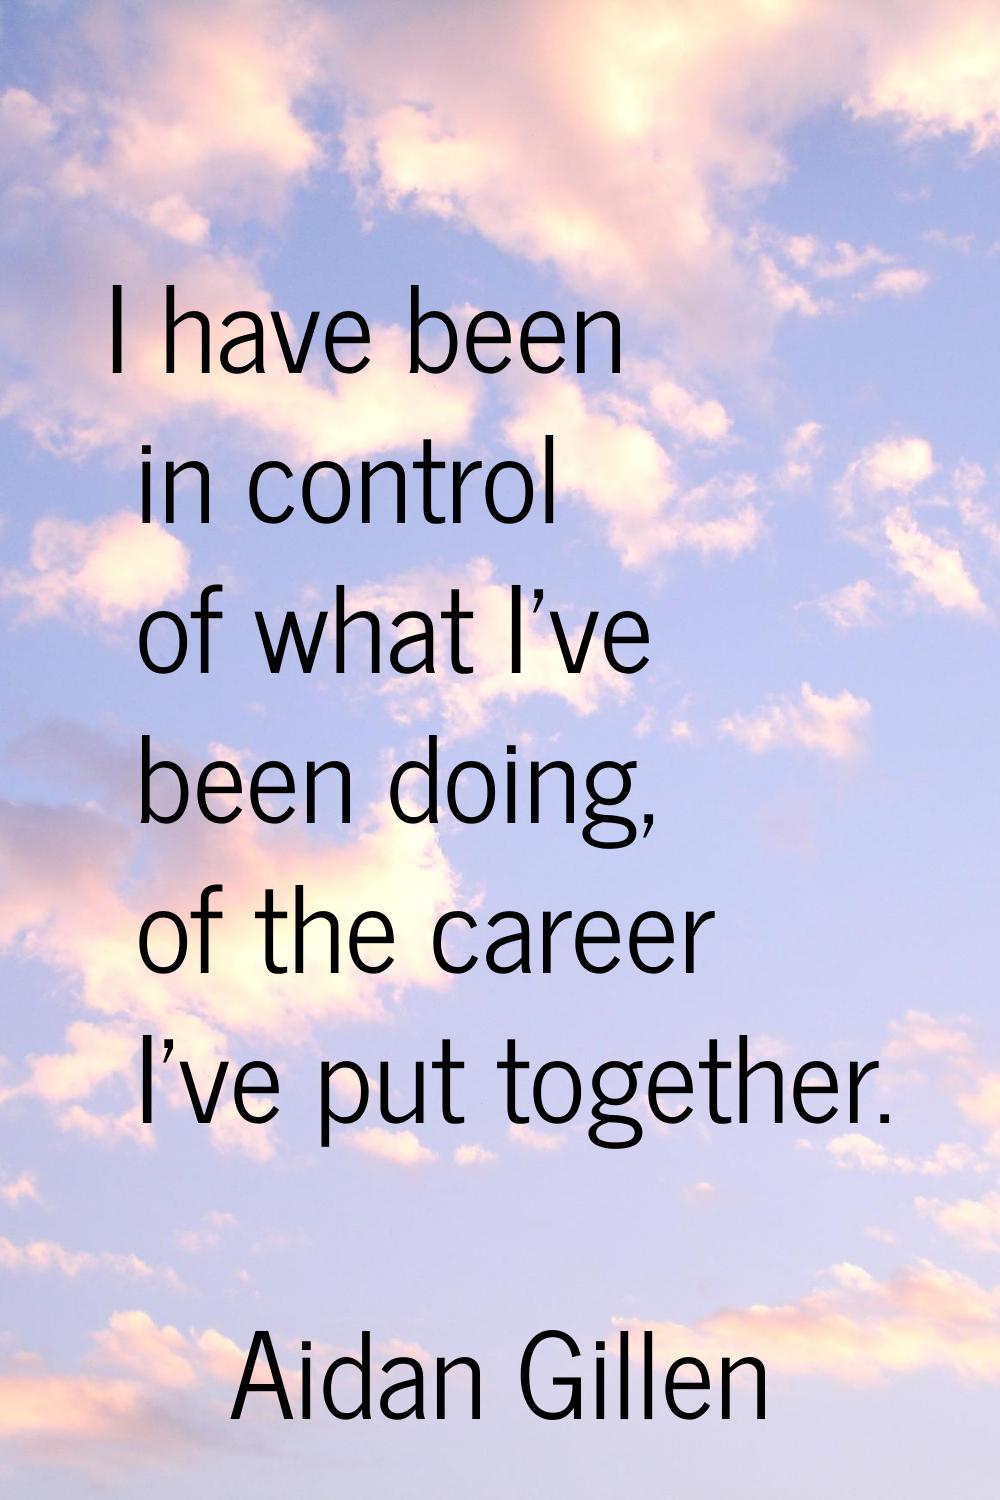 I have been in control of what I've been doing, of the career I've put together.